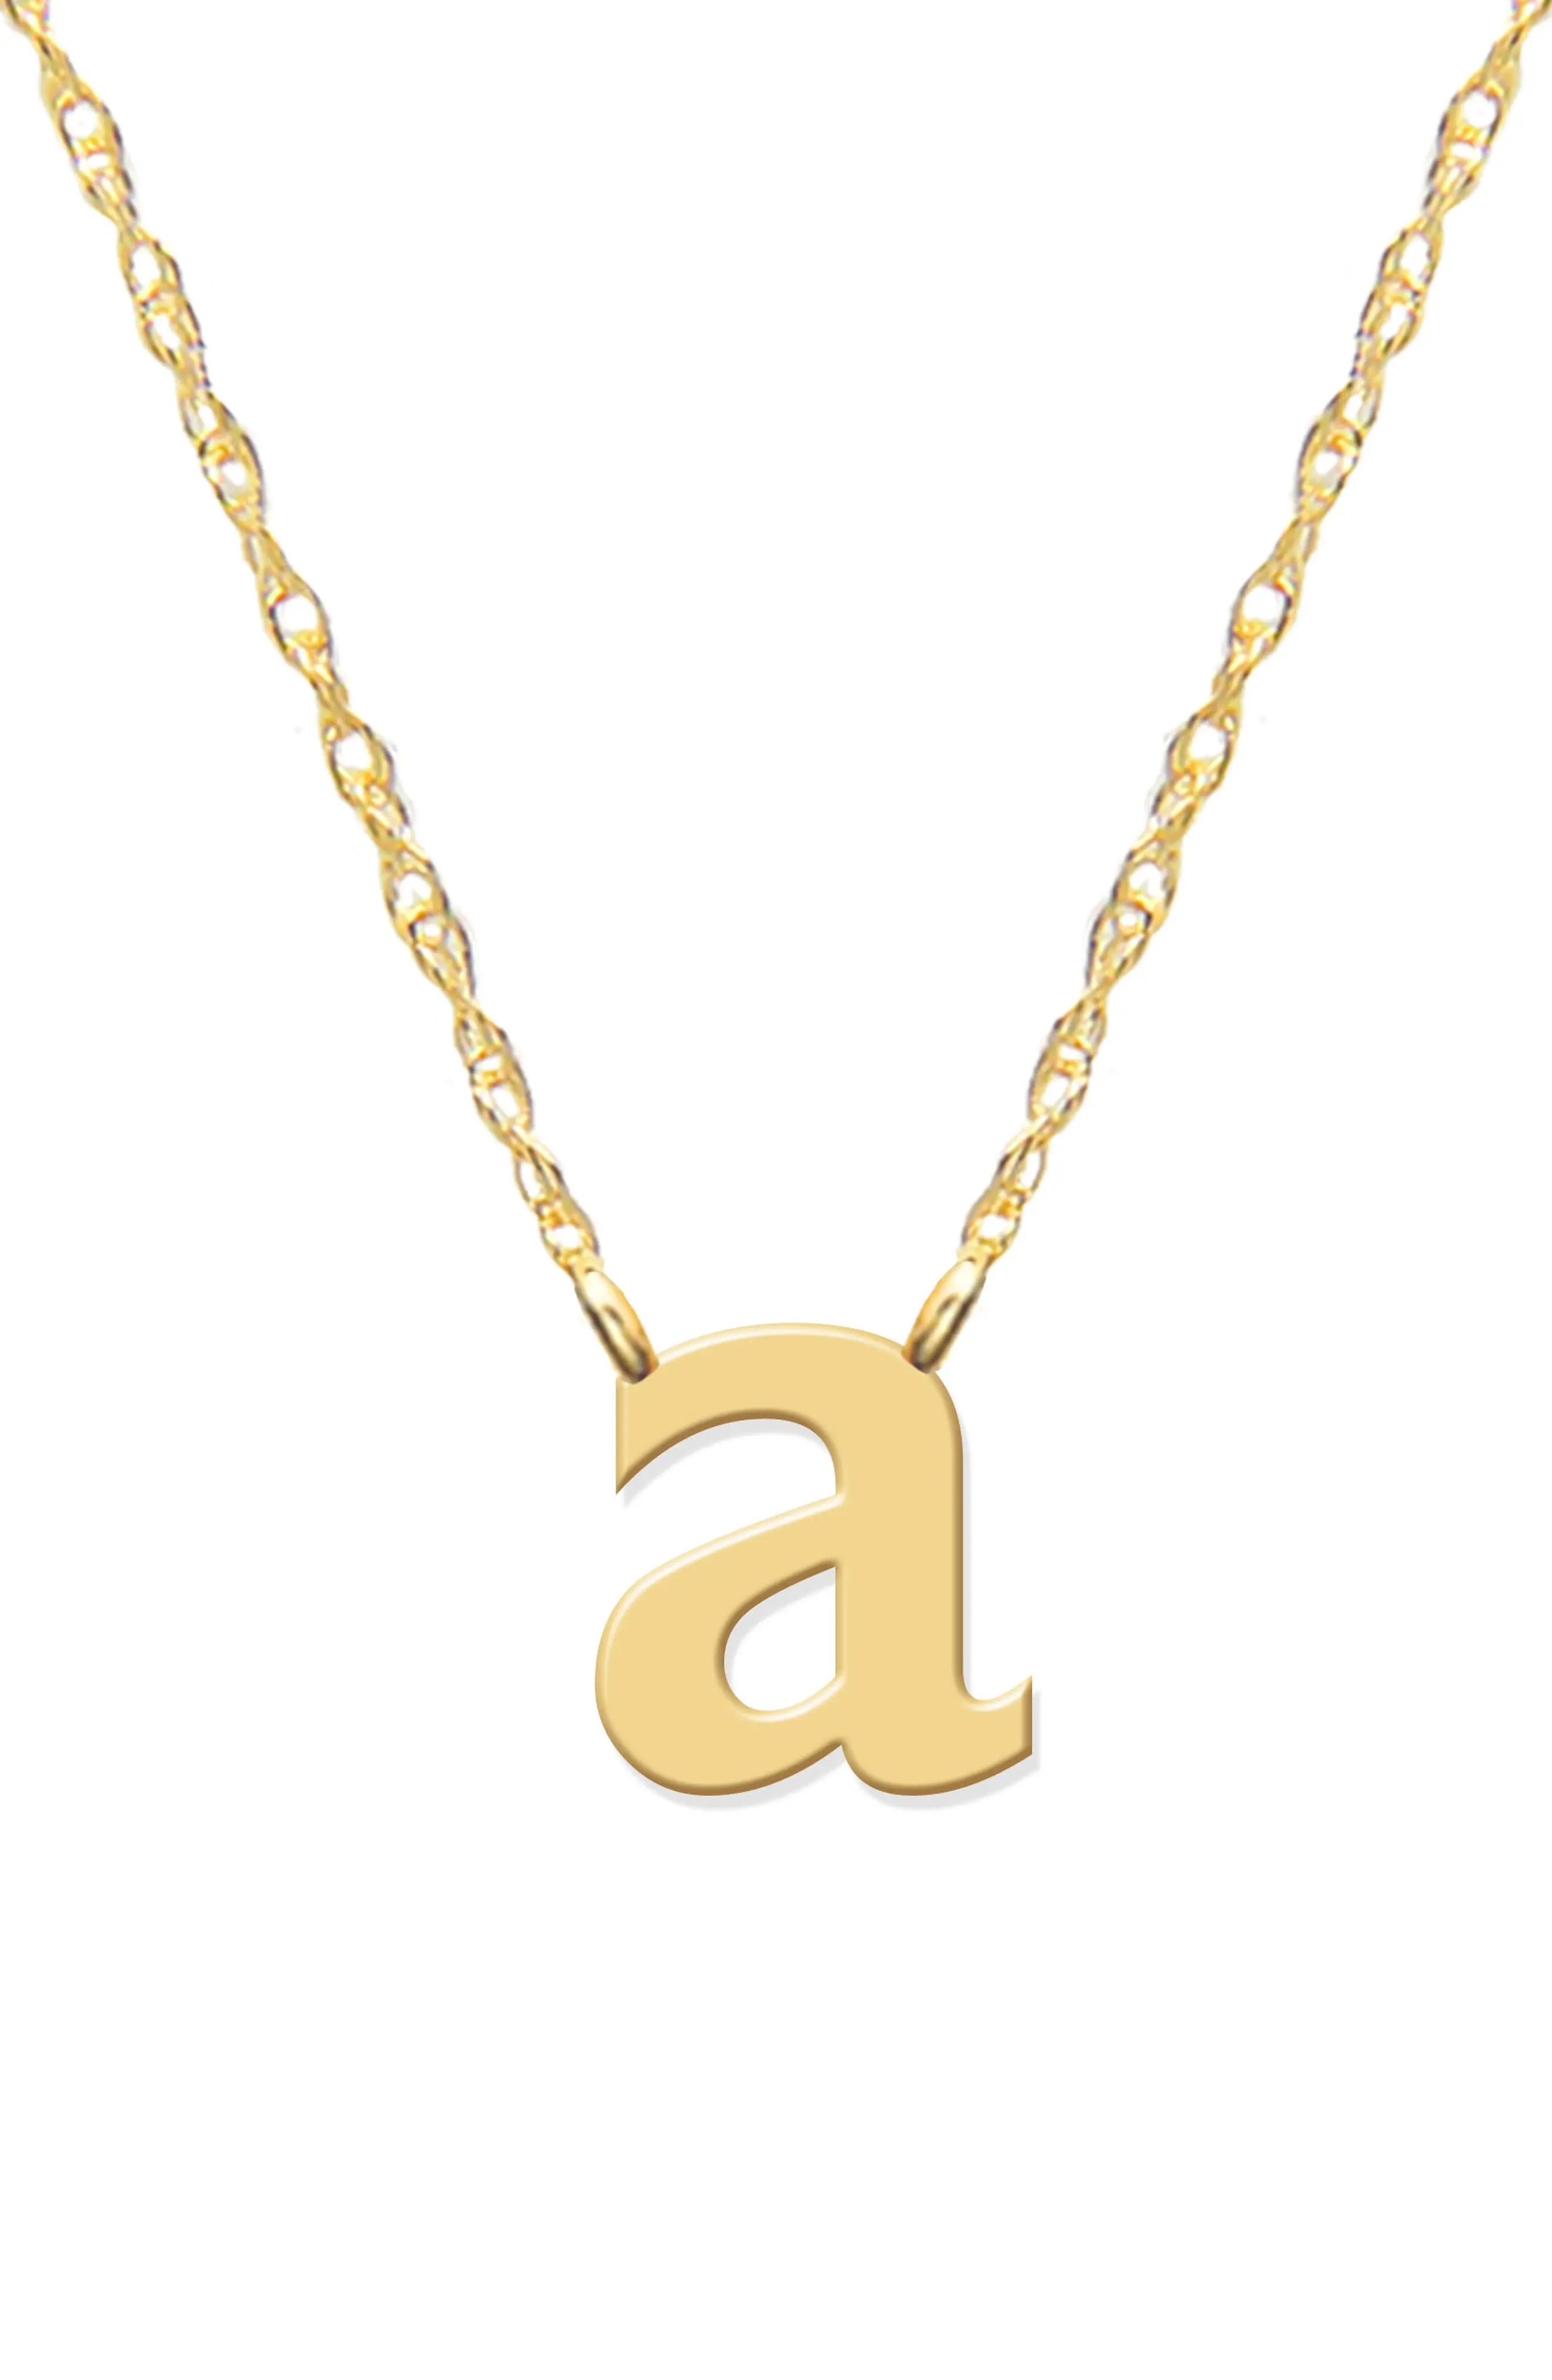 Jane Basch Designs Lowercase Initial Pendant Necklace | Nordstrom